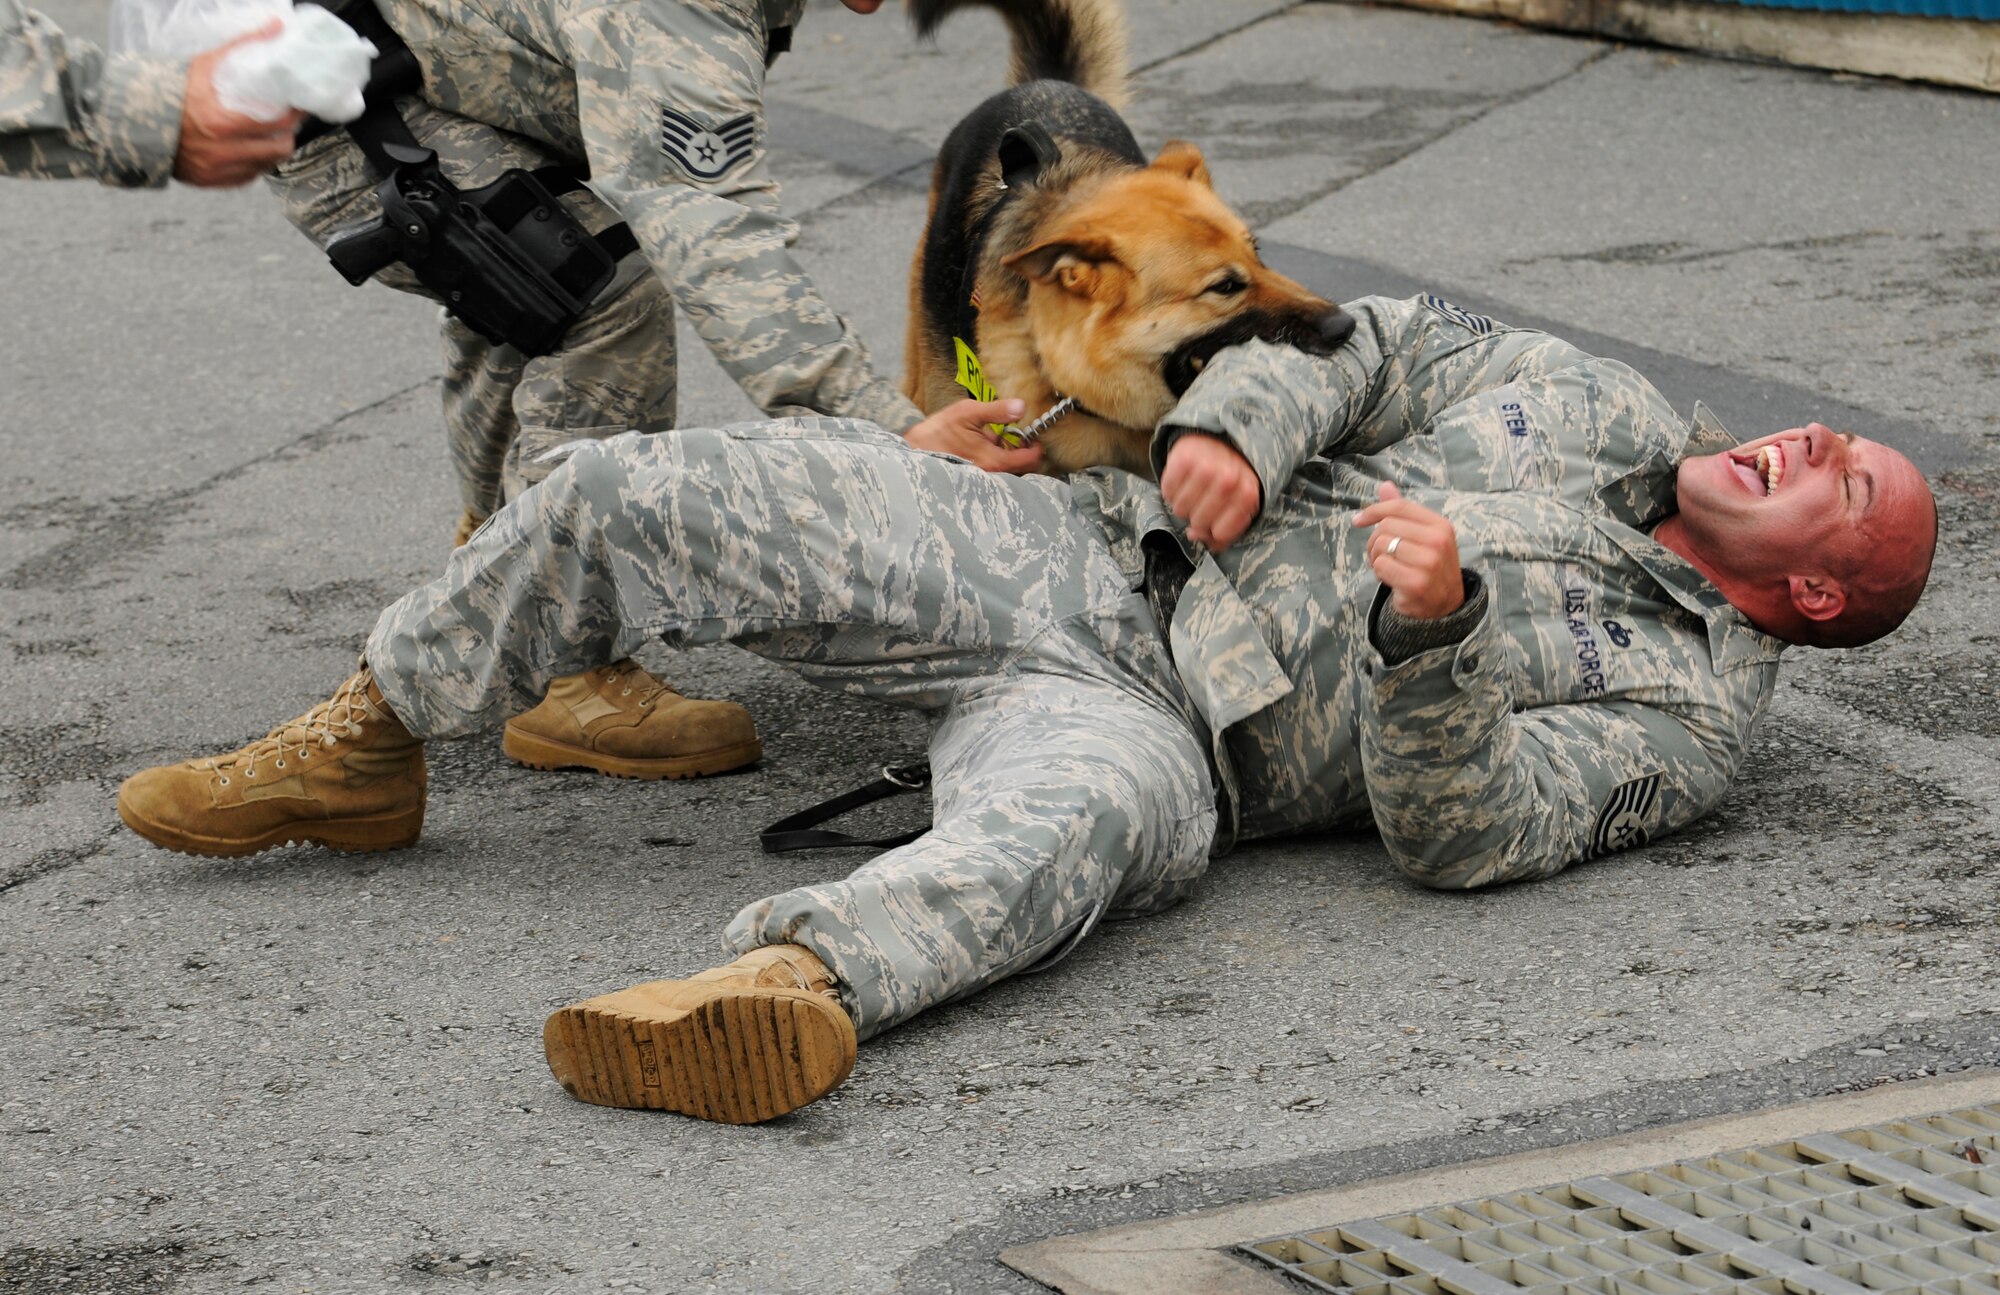 Tech. Sgt. Bradley Stem of the18th Security Forces Squadron, is taken down by Zena, a military working dog, during Beverly High 09-2 Local Operational Readiness Exercise May 12. The LORE tests base personnel on their readiness for real world emergency/combat events.  (U.S. Air Force photo/Airman 1st Class Chad Warren)